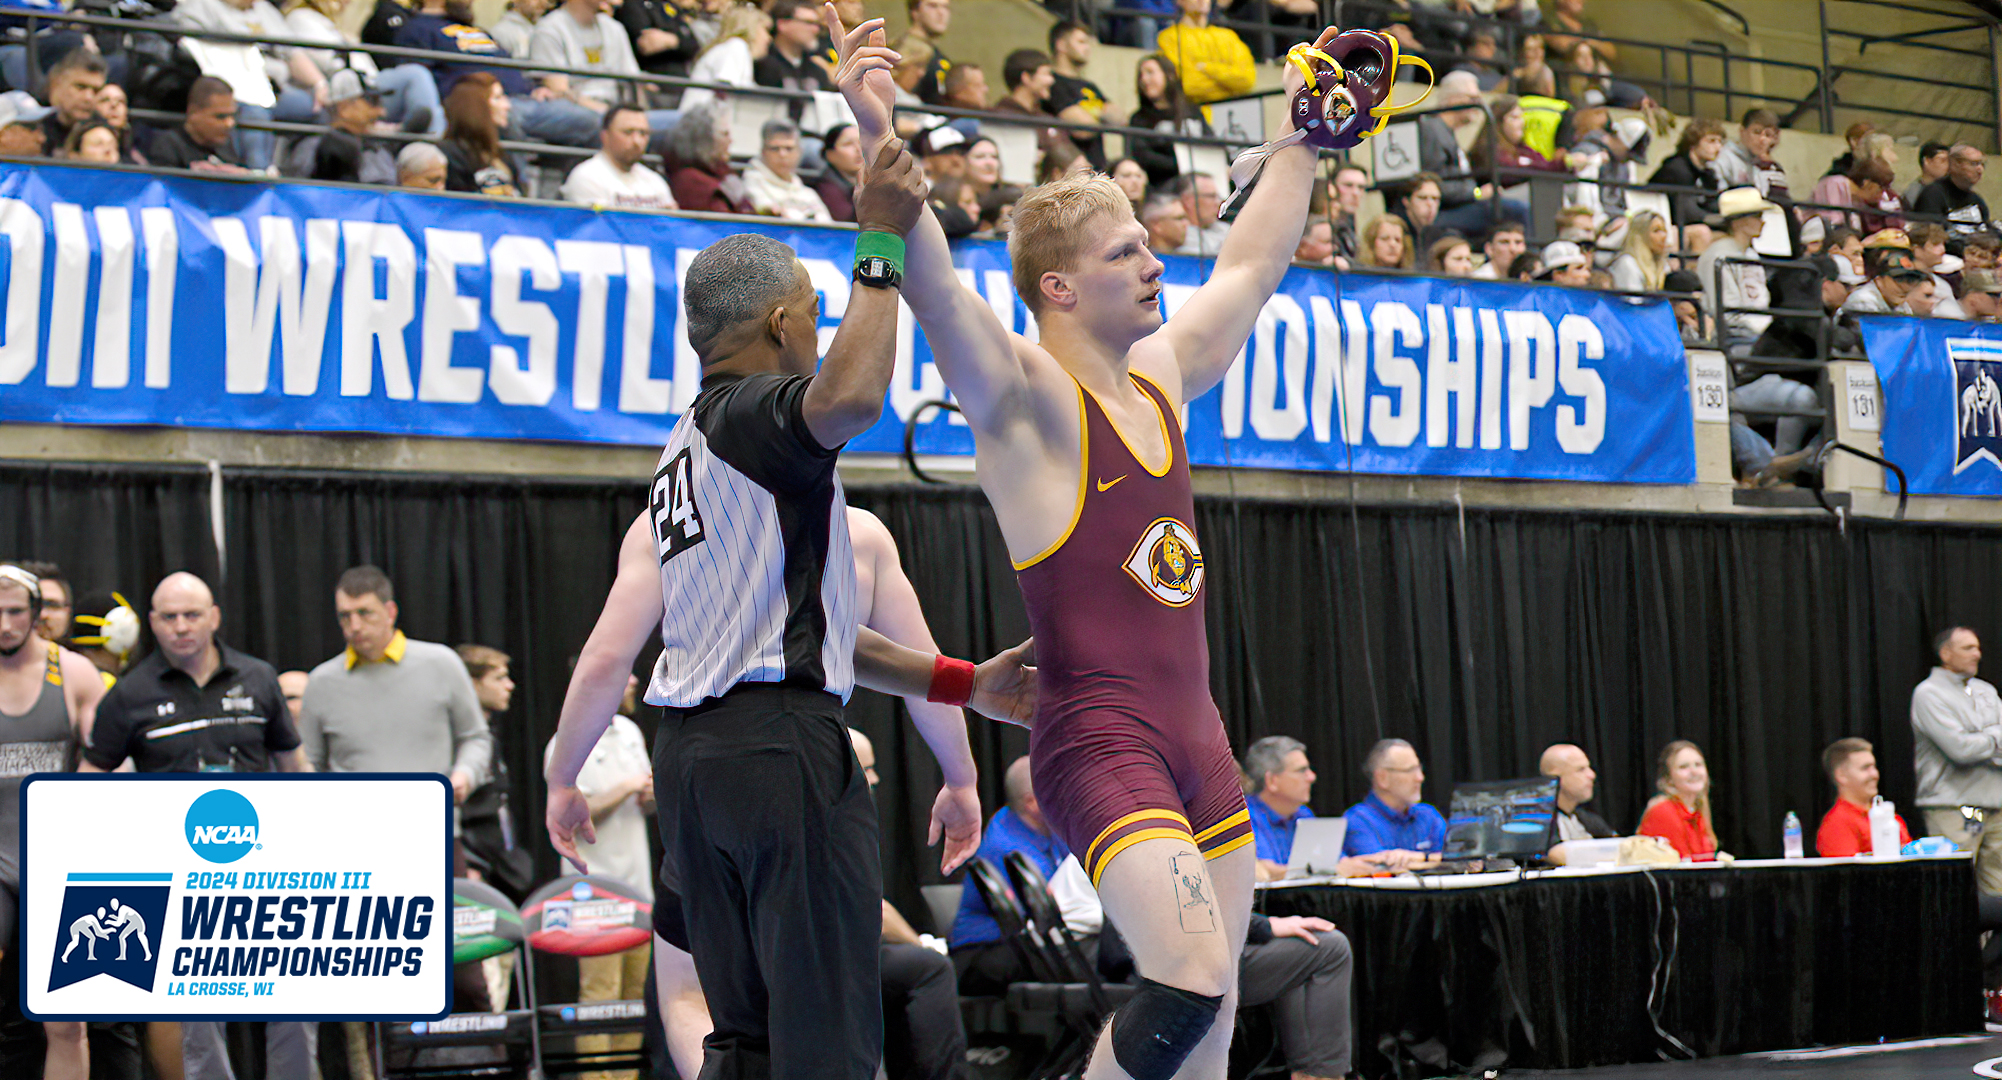 Senior Gabe Zierden gets his hand raised after his 8-2 win in the quarterfinals at the NCAA Meet. That win earned him All-American honors.